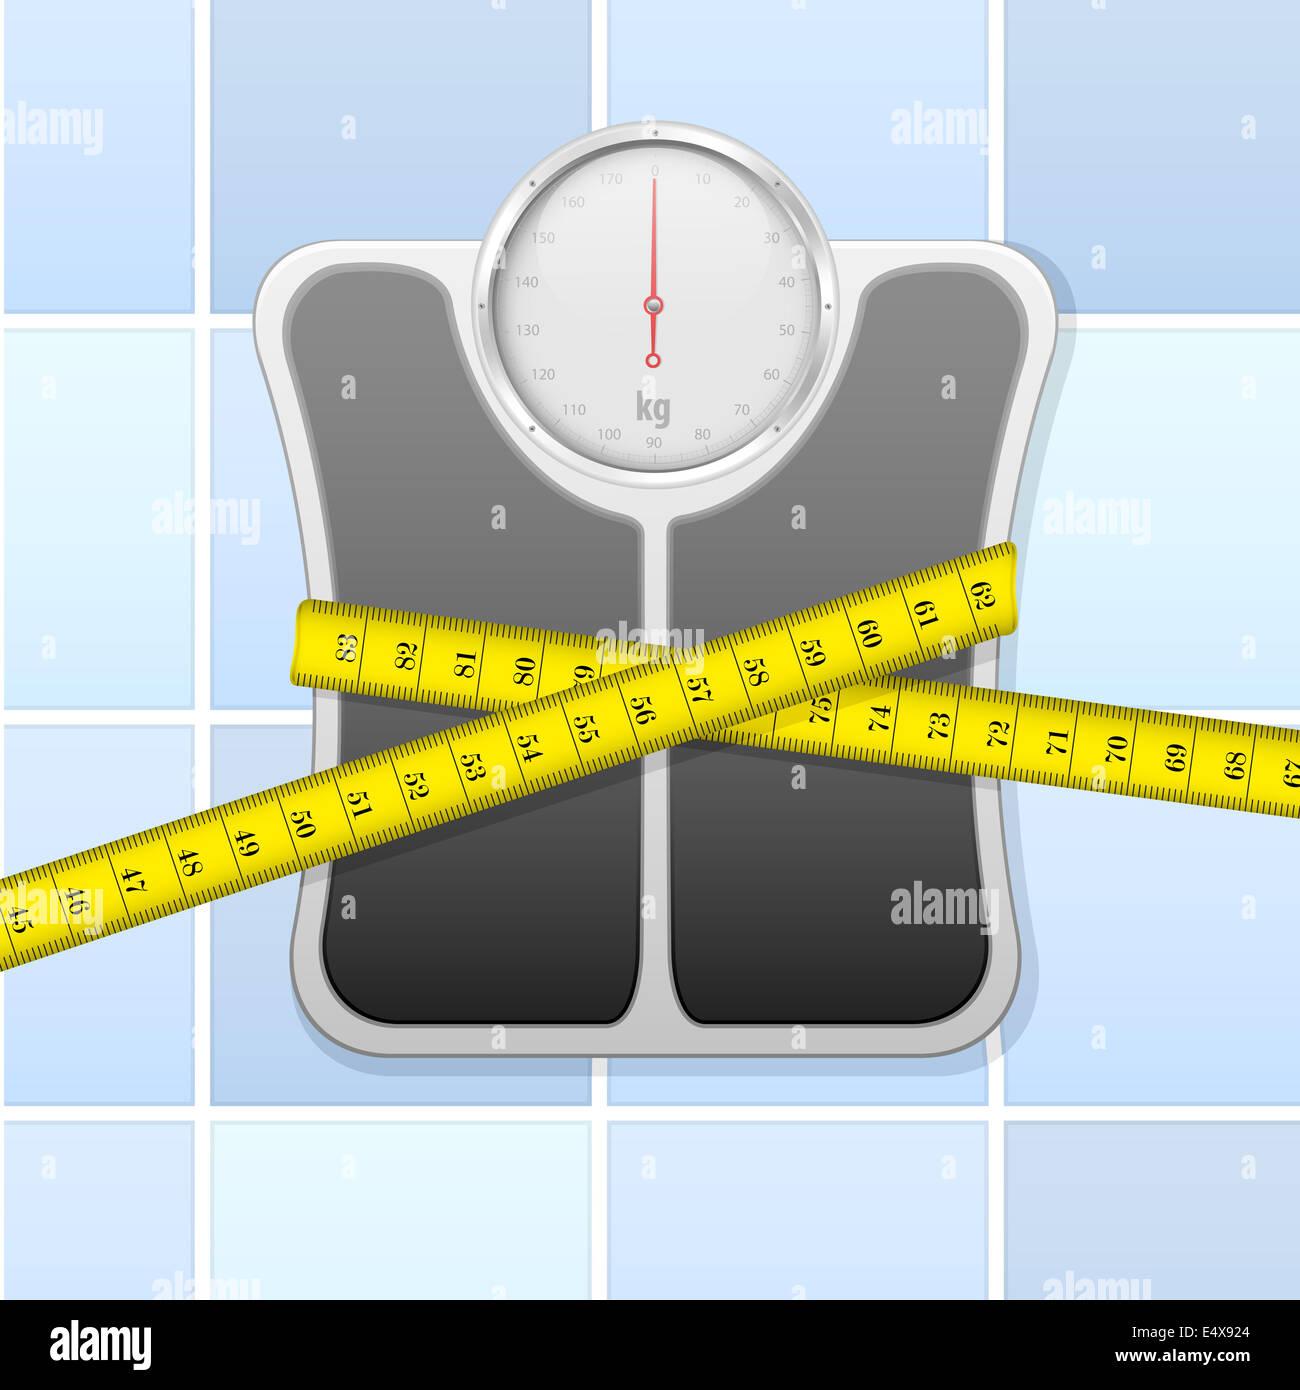 Body weight scales and measurement tape patterns Vector Image